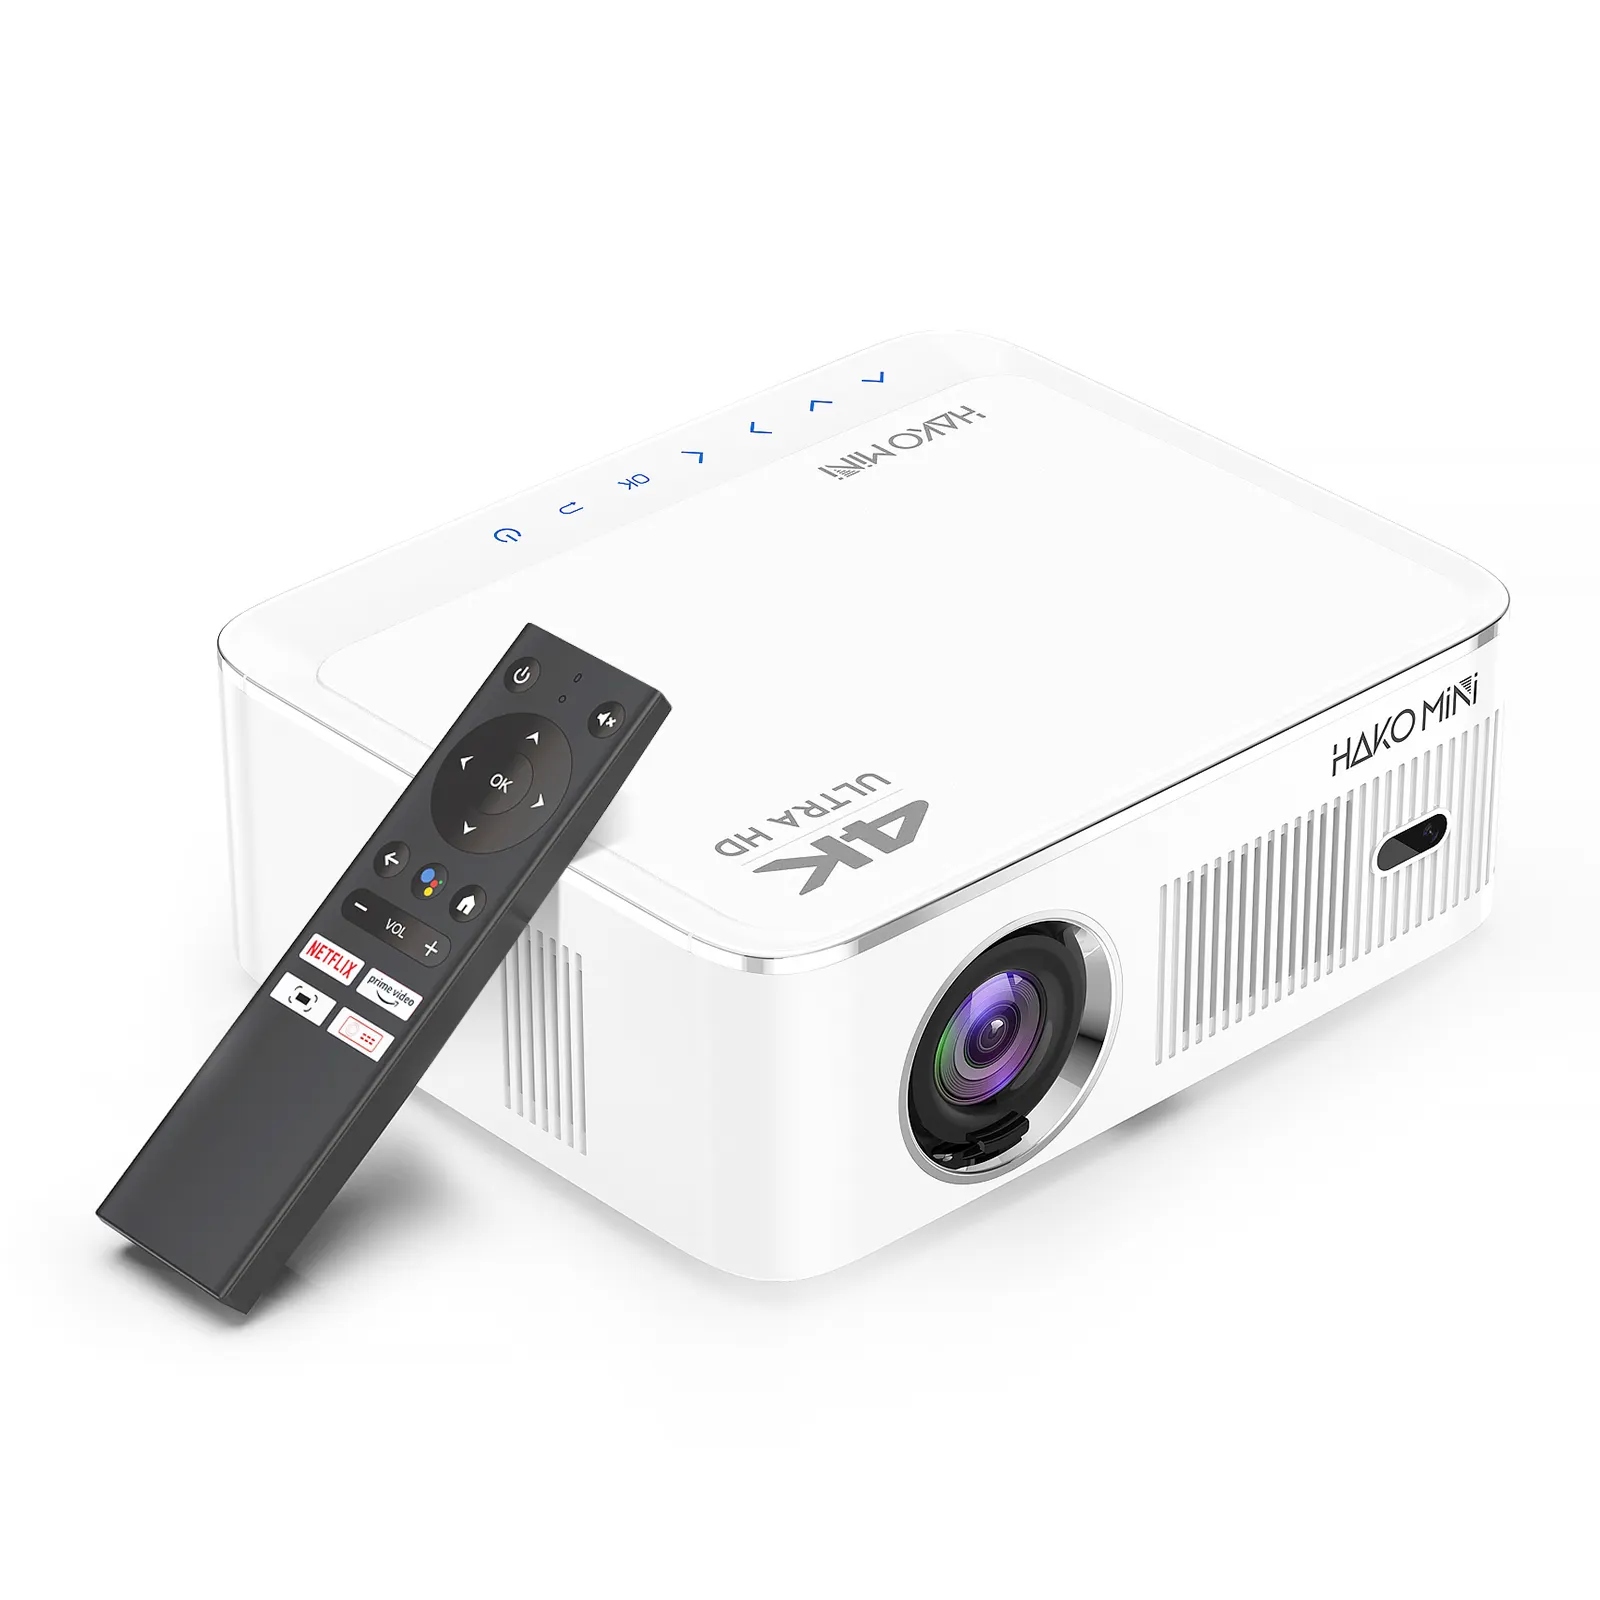 OEM ODM LCD Projector Manufacturer Android TV 4K Hakomini PL5 Google certified Projector